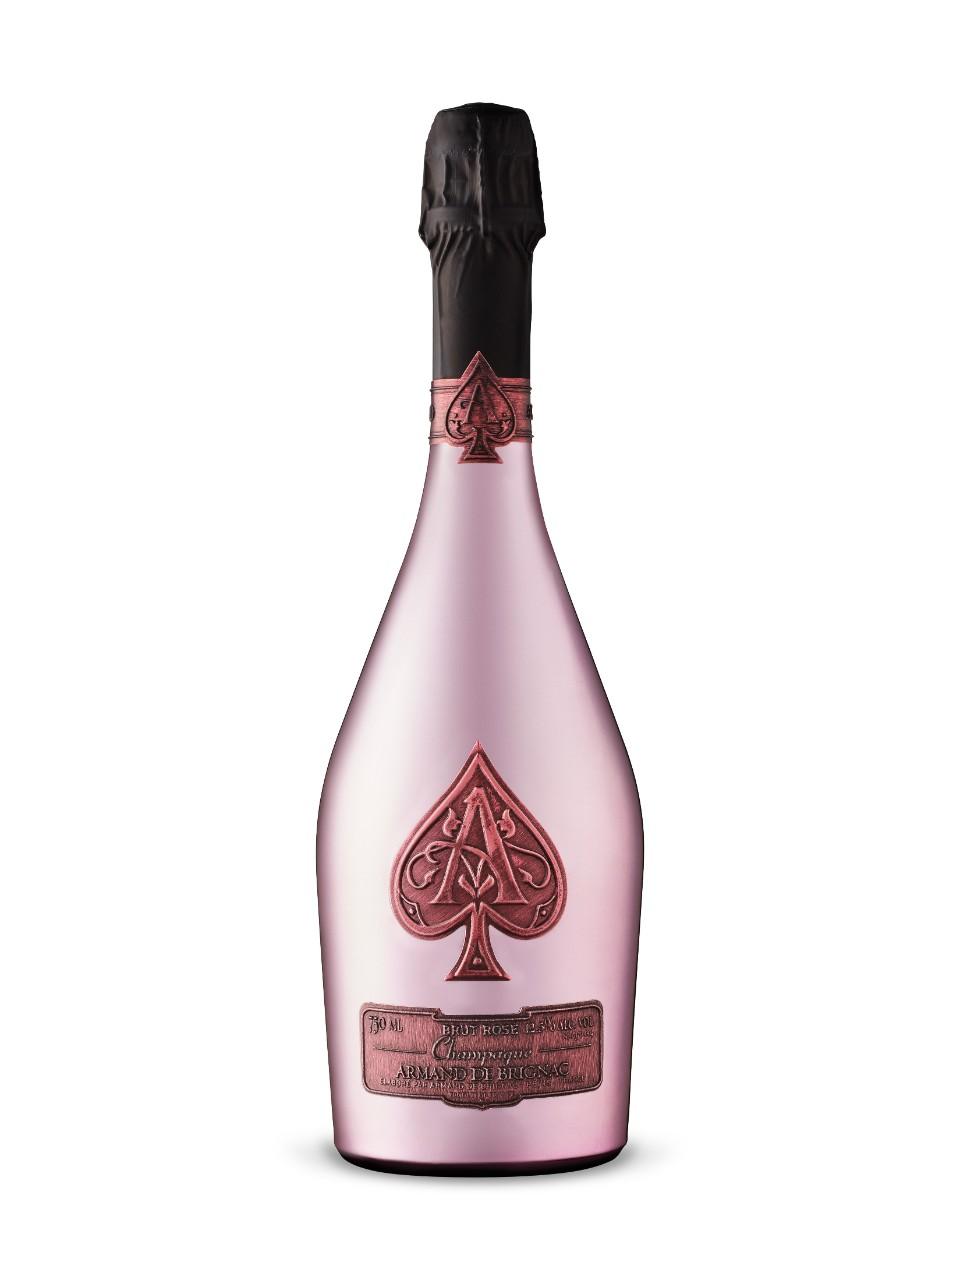 8 Things You Didn't Know About Ace of Spades Champagne AKA Armand